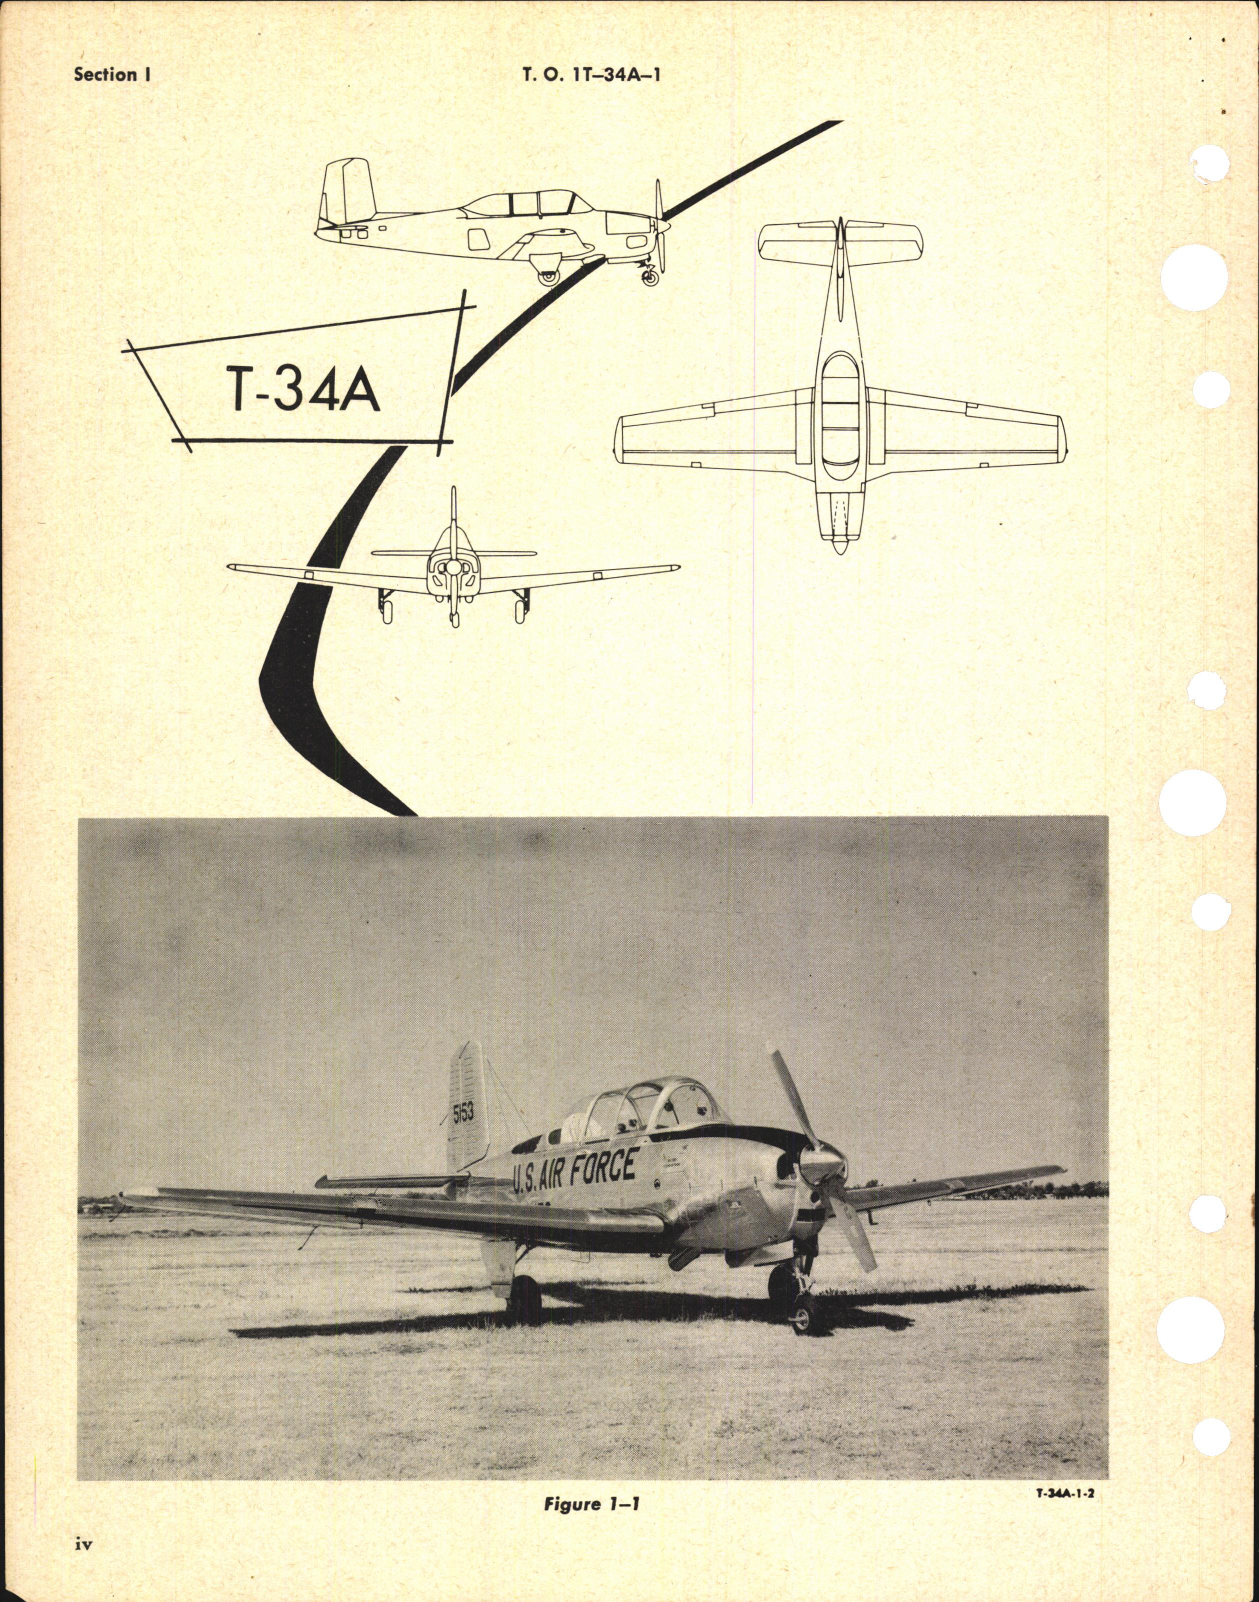 Sample page 6 from AirCorps Library document: Flight Handbook for T-34A